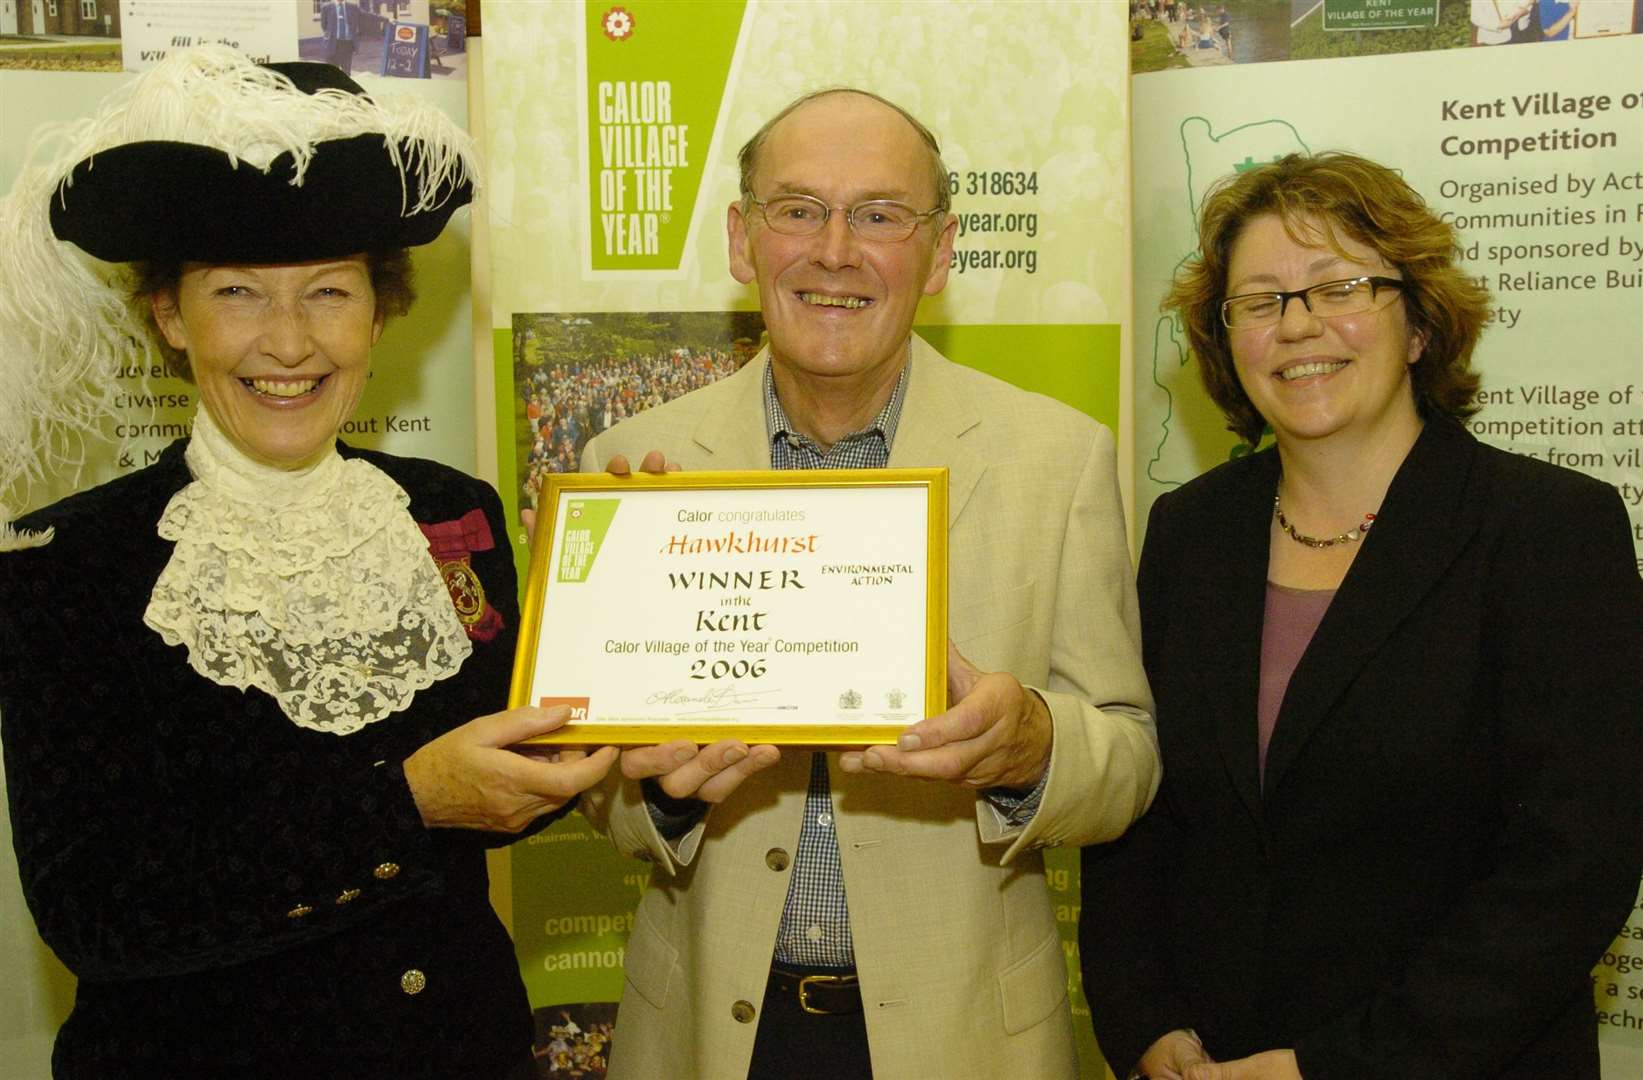 John Hunt accepting the award for Hawkhurst as the Environmental Action winner in the 2006 Village of the Year contest with the High Sheriff Amanda Cottrell and the CEO of Kent CPRE, Hilary Newport